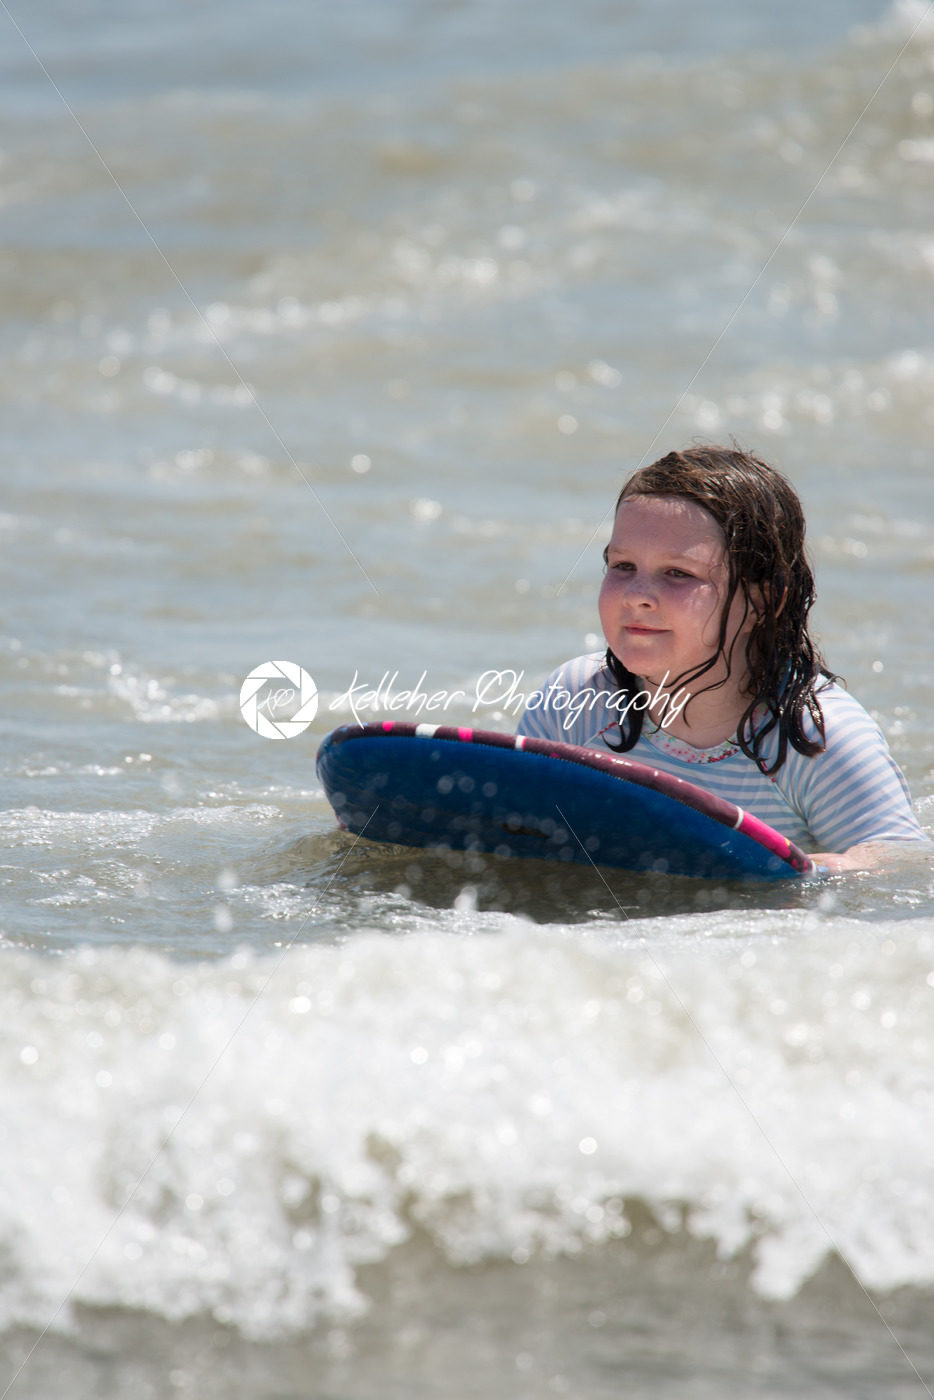 Girl surfing the waves in the ocean on a boogy board - Kelleher Photography Store